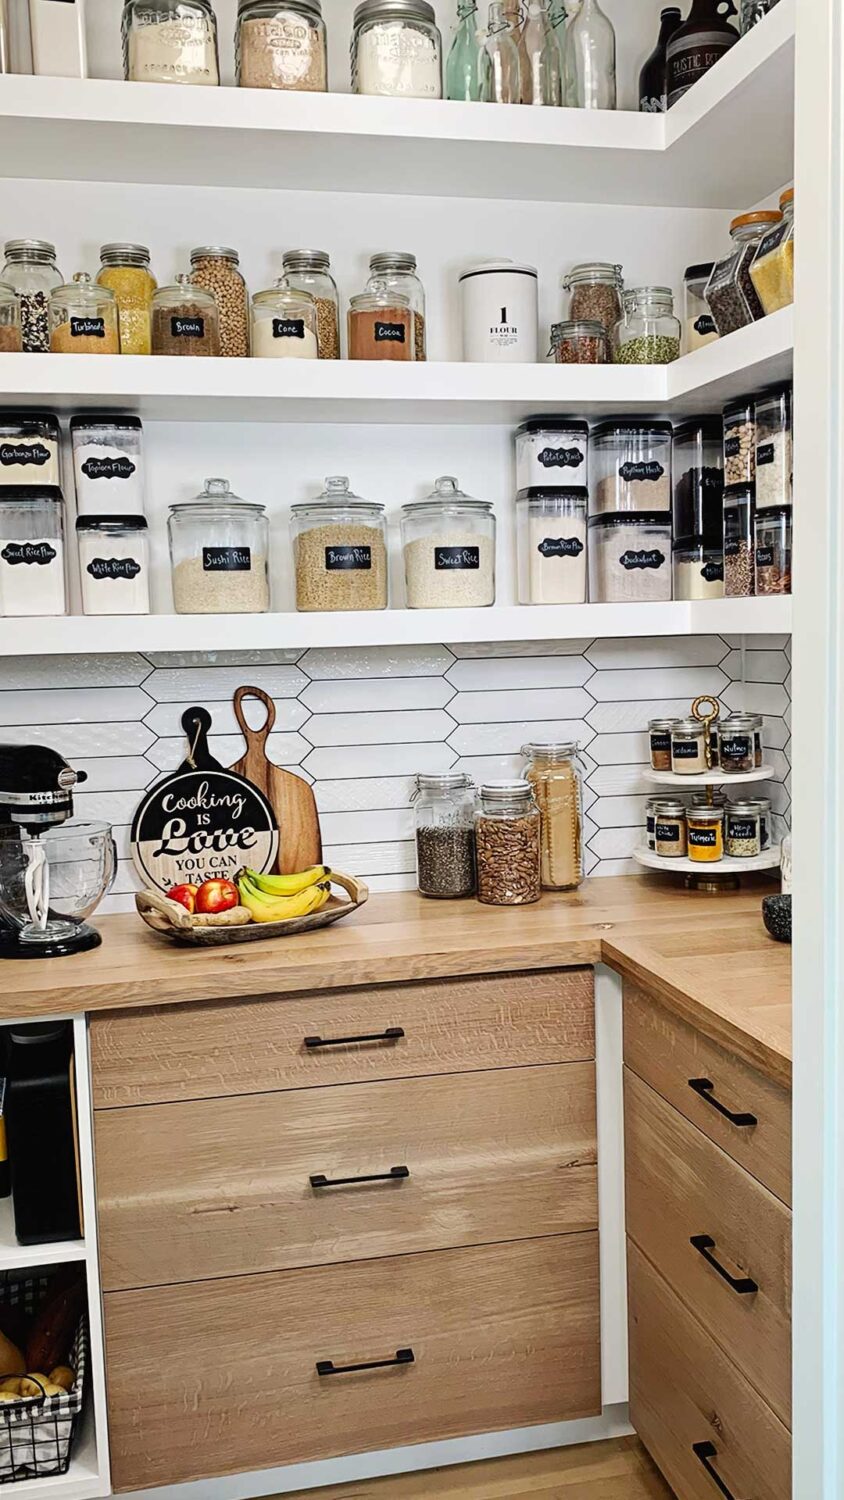 We will show you exactly how we created the most perfect Kitchen Pantry! DIY kitchen renos, pantry renovation, DIY kitchen renos, pantry design pantry inspiration pantry idea, pantry renos, DIY butlers pantry, diy, DIY cabinet with drawers, DIY kitchen base cabinet, diy kitchen renos, DIY pantry reno, DIY projects, DIY renos, diy kitchen, butlers pantry